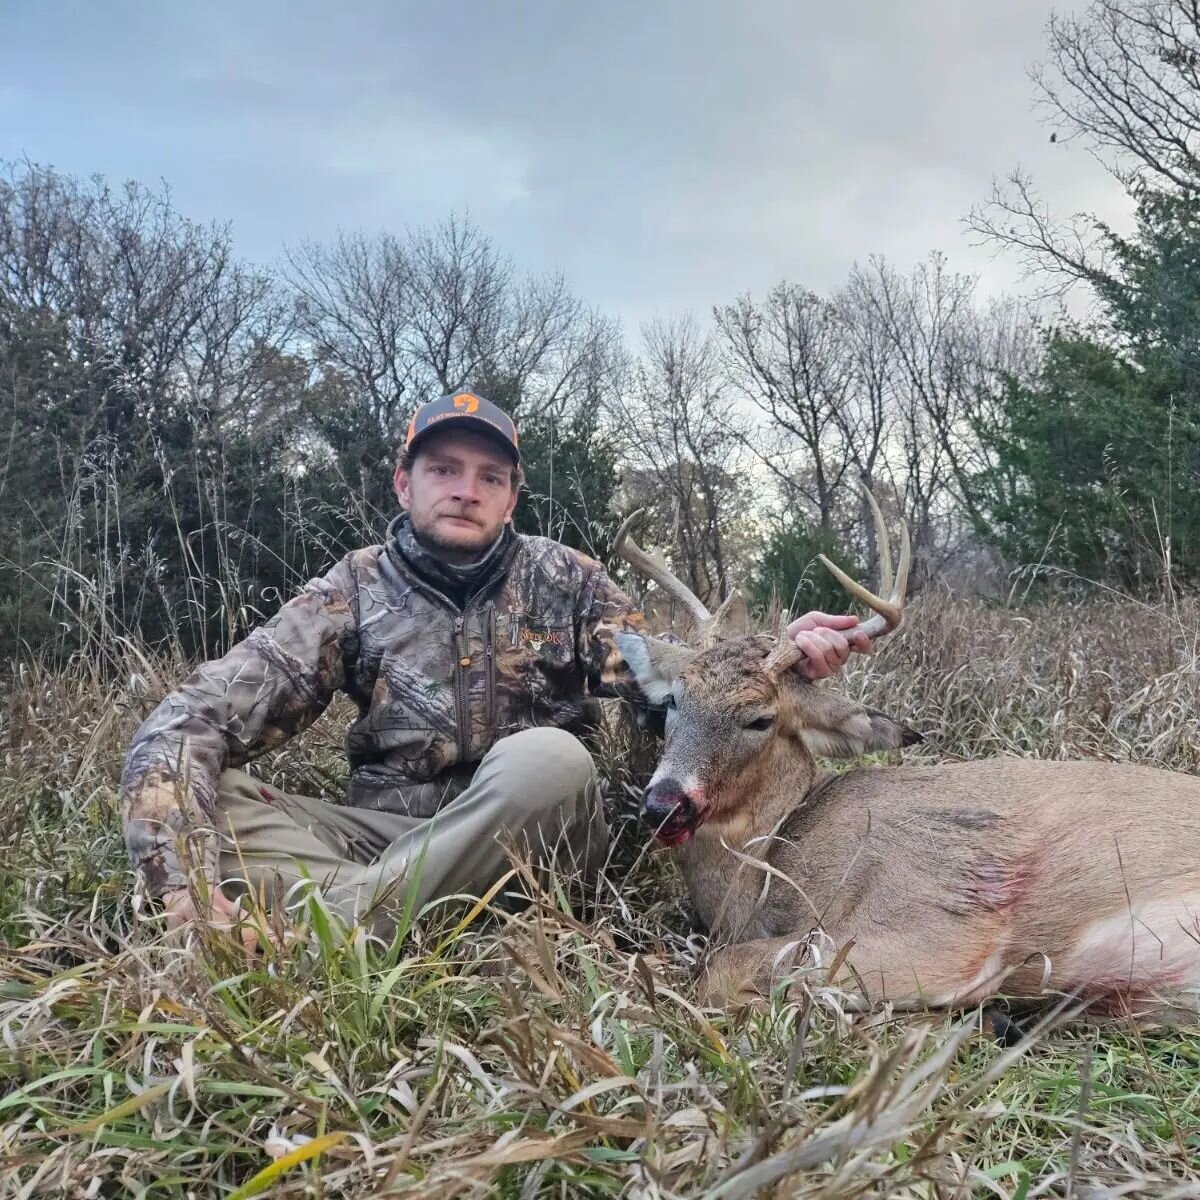 Turkey season is almost here, but that doesn't mean you can't still enjoy some deer hunting content.  Our successful Kansas hunt is live on our Youtube channel as well as all the hunts leading up to it!

#deer #deerhunter #deerhunting #hunting #hunte